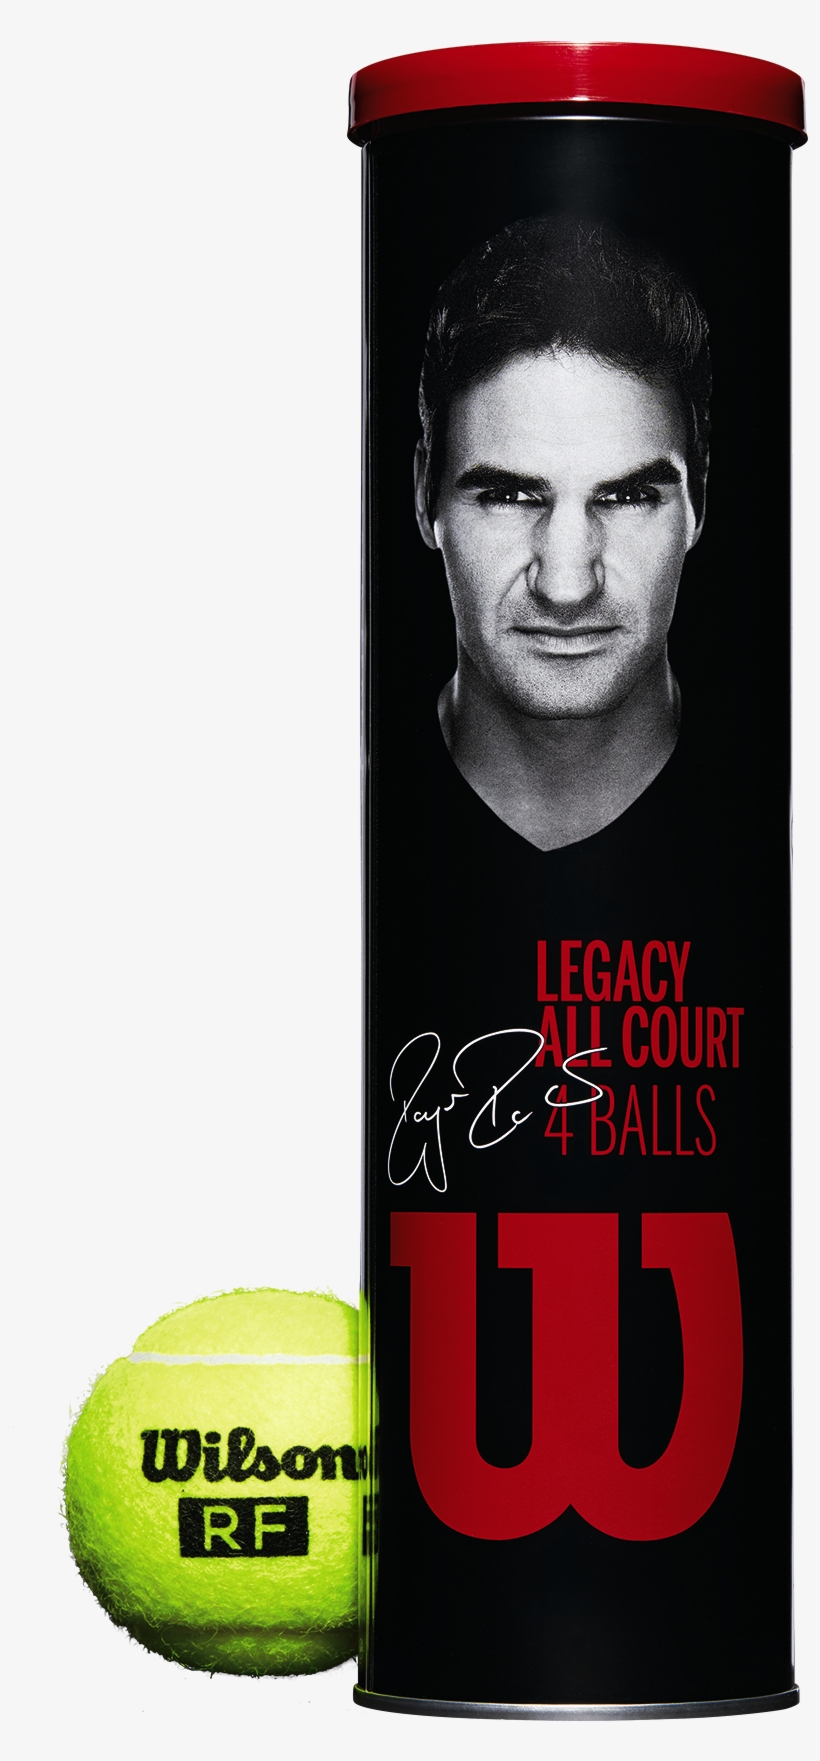 Images - Wilson Rf Legacy Tennis Ball, transparent png #7737447